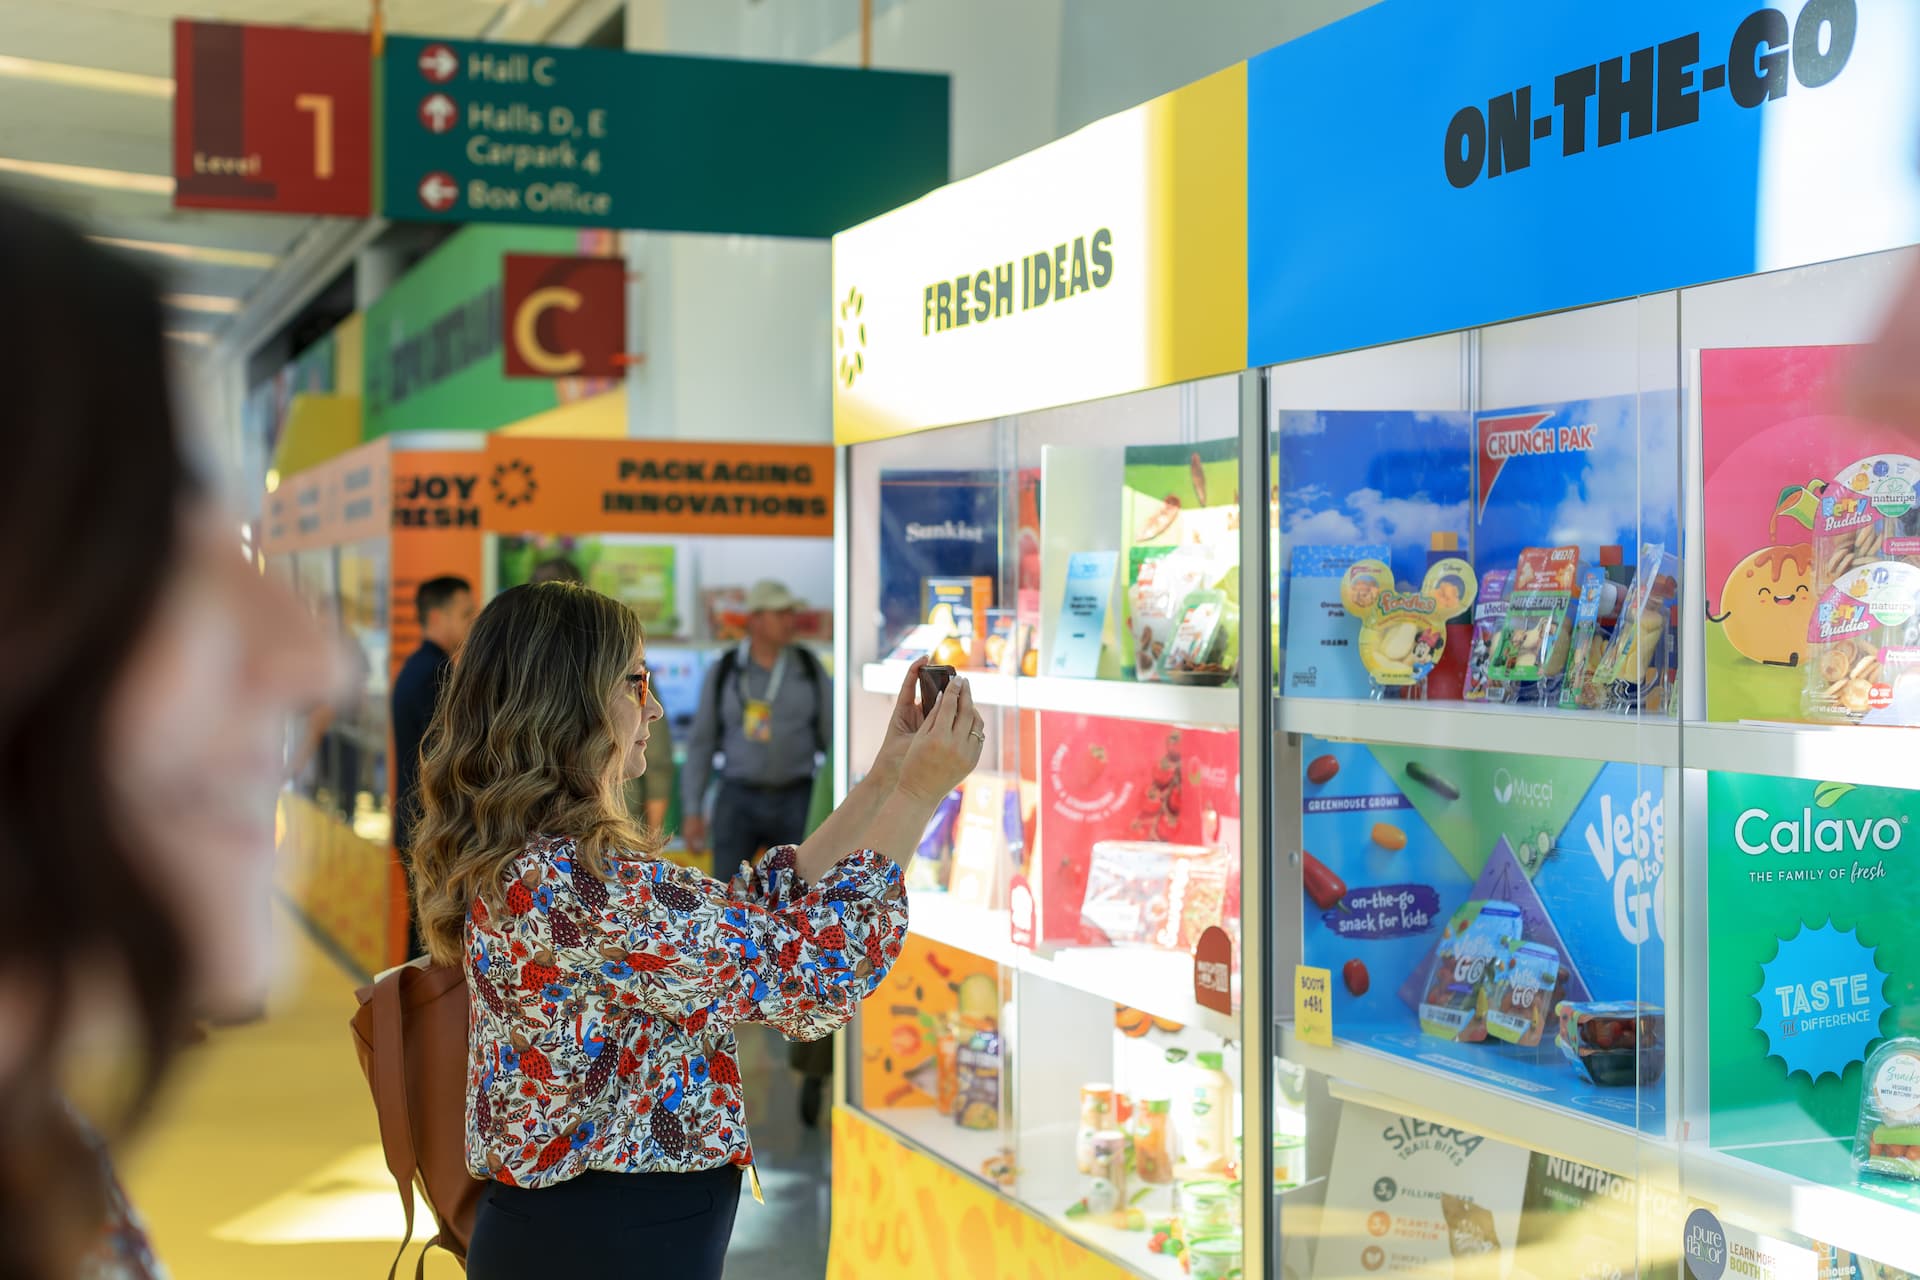 A woman takes a photo with her phone of display items at Fresh Ideas 2023.